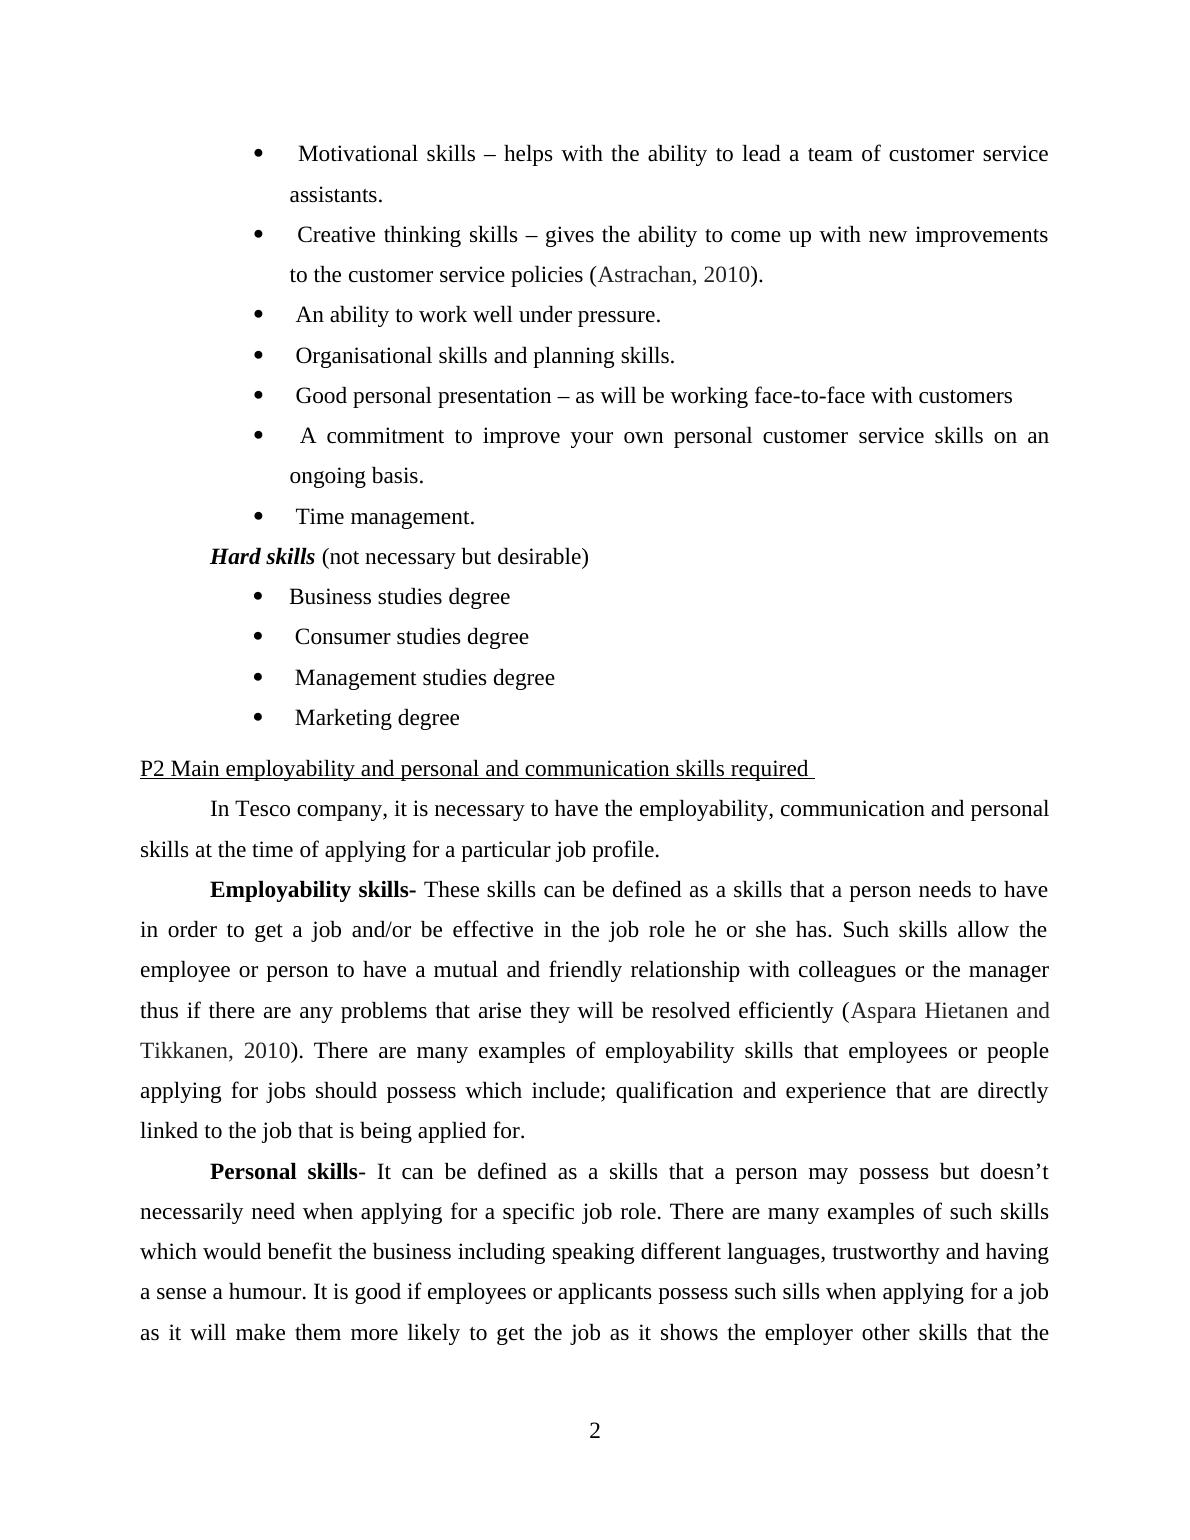 Essay on Business Resources - Tesco_4